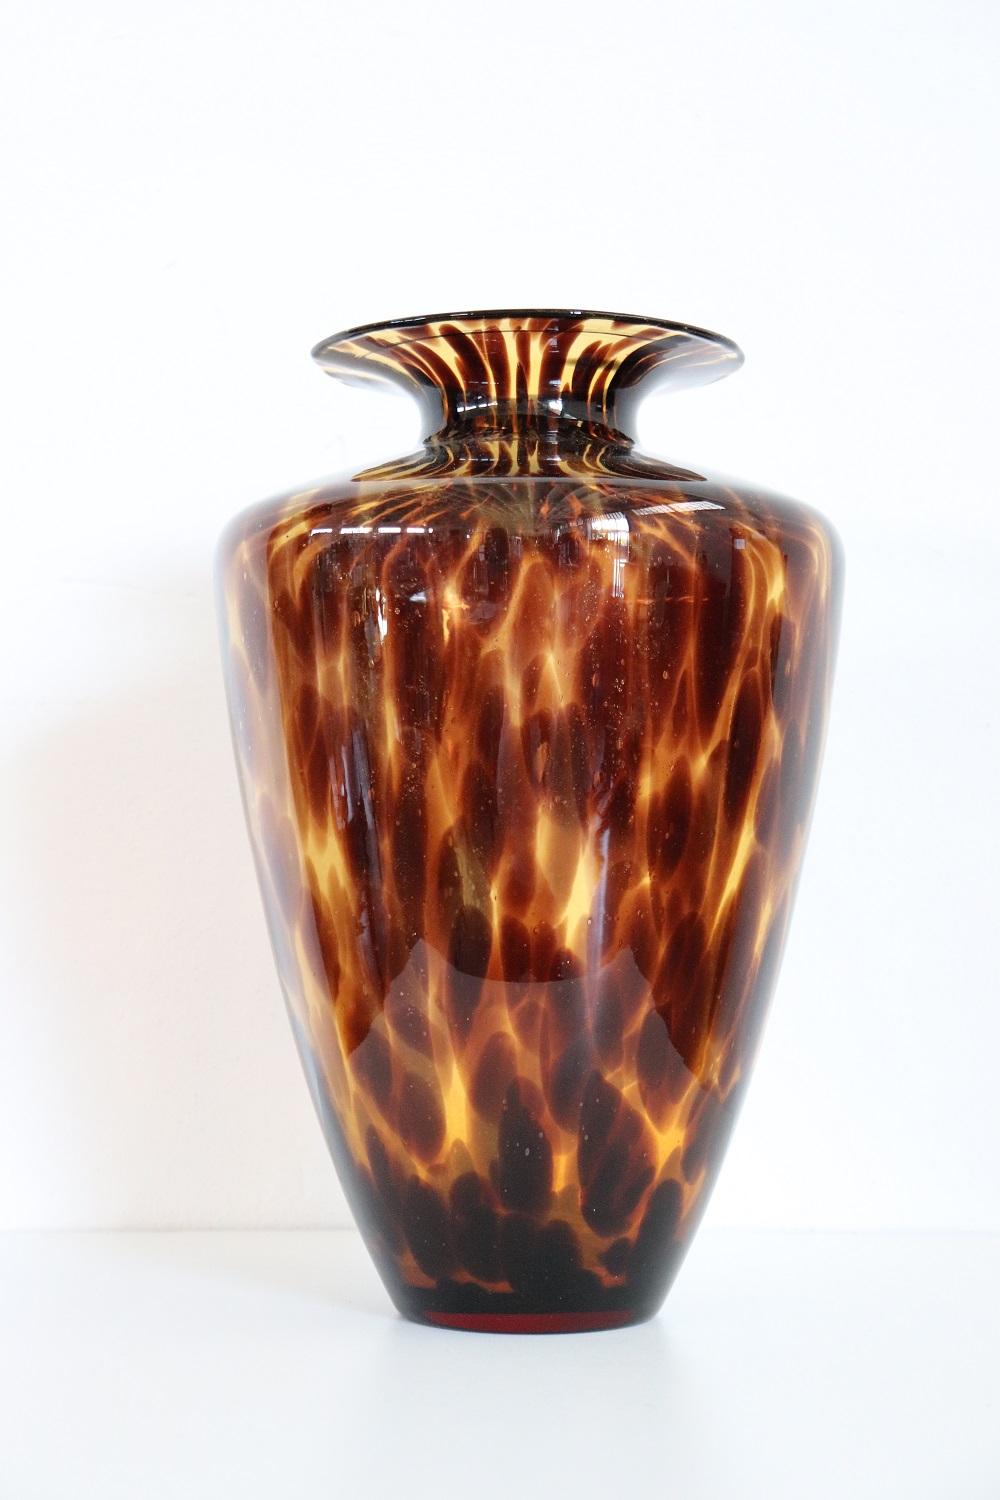 Refined artistic glass vase, Italy, production 1980s Murano. Not signed. High quality artistic craftsmanship hand-blown glass. Particular Tiger's Eye Color. Perfect conditions!